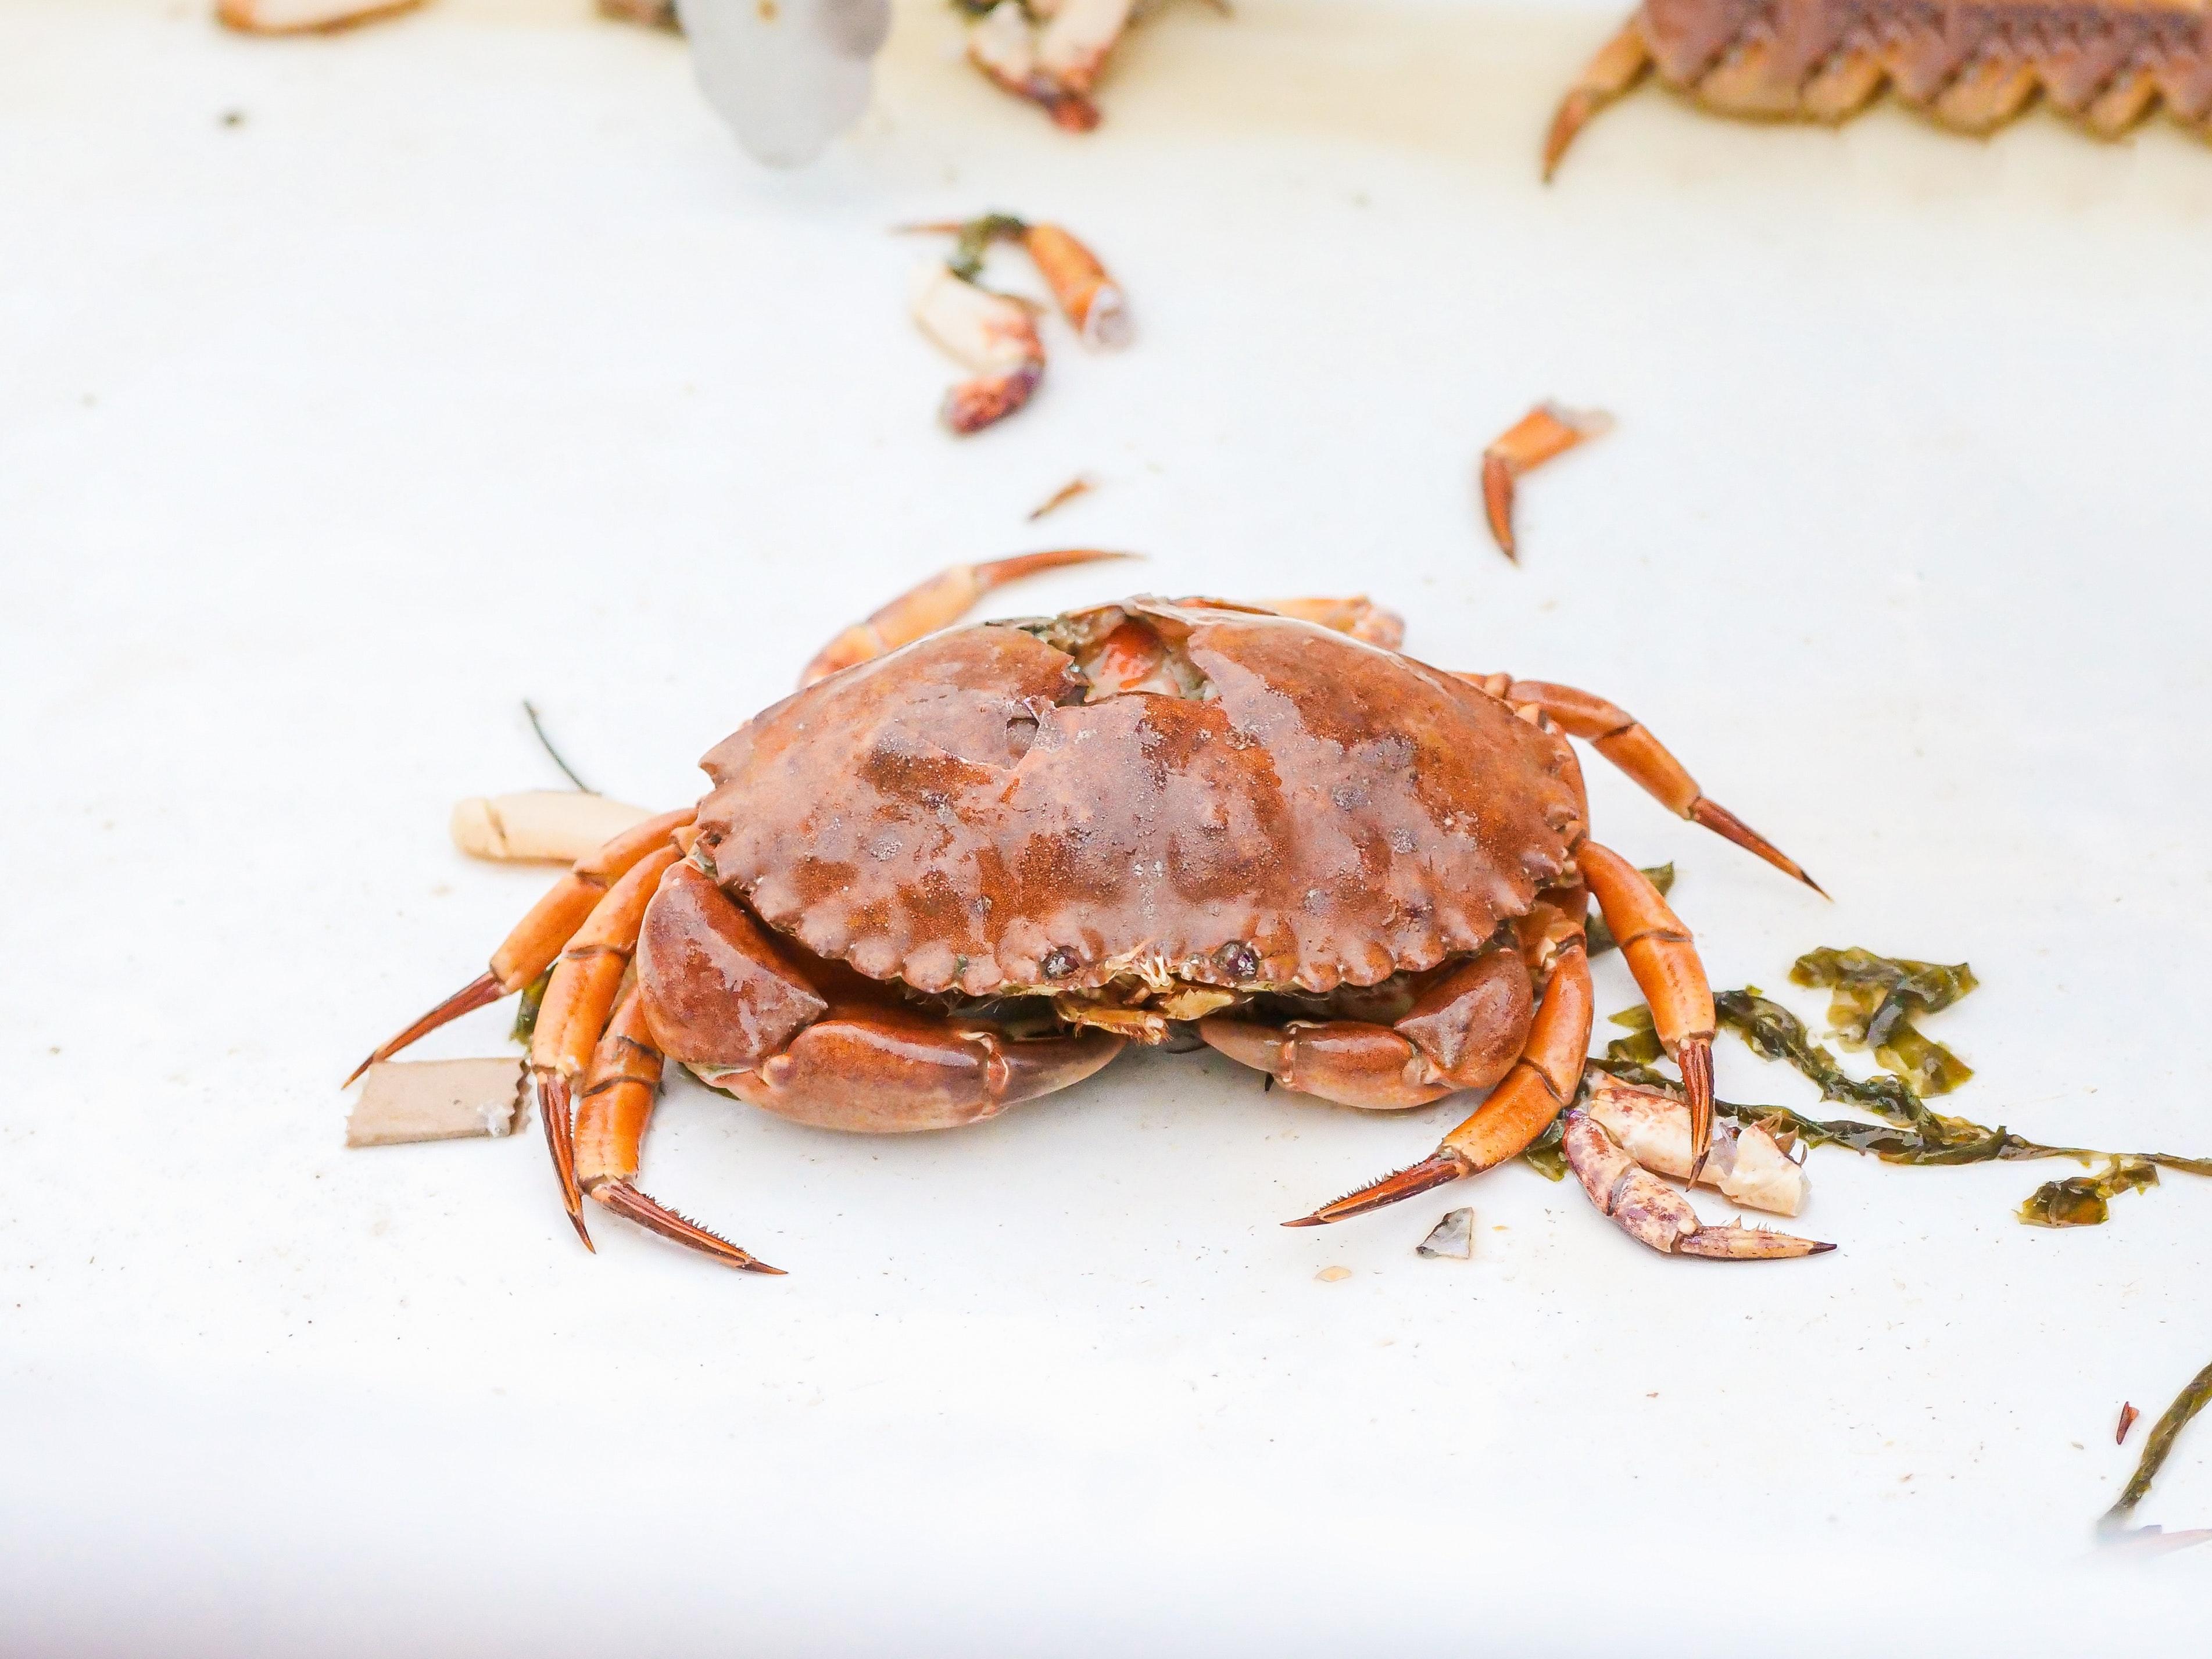 Why red crab are not edible? 